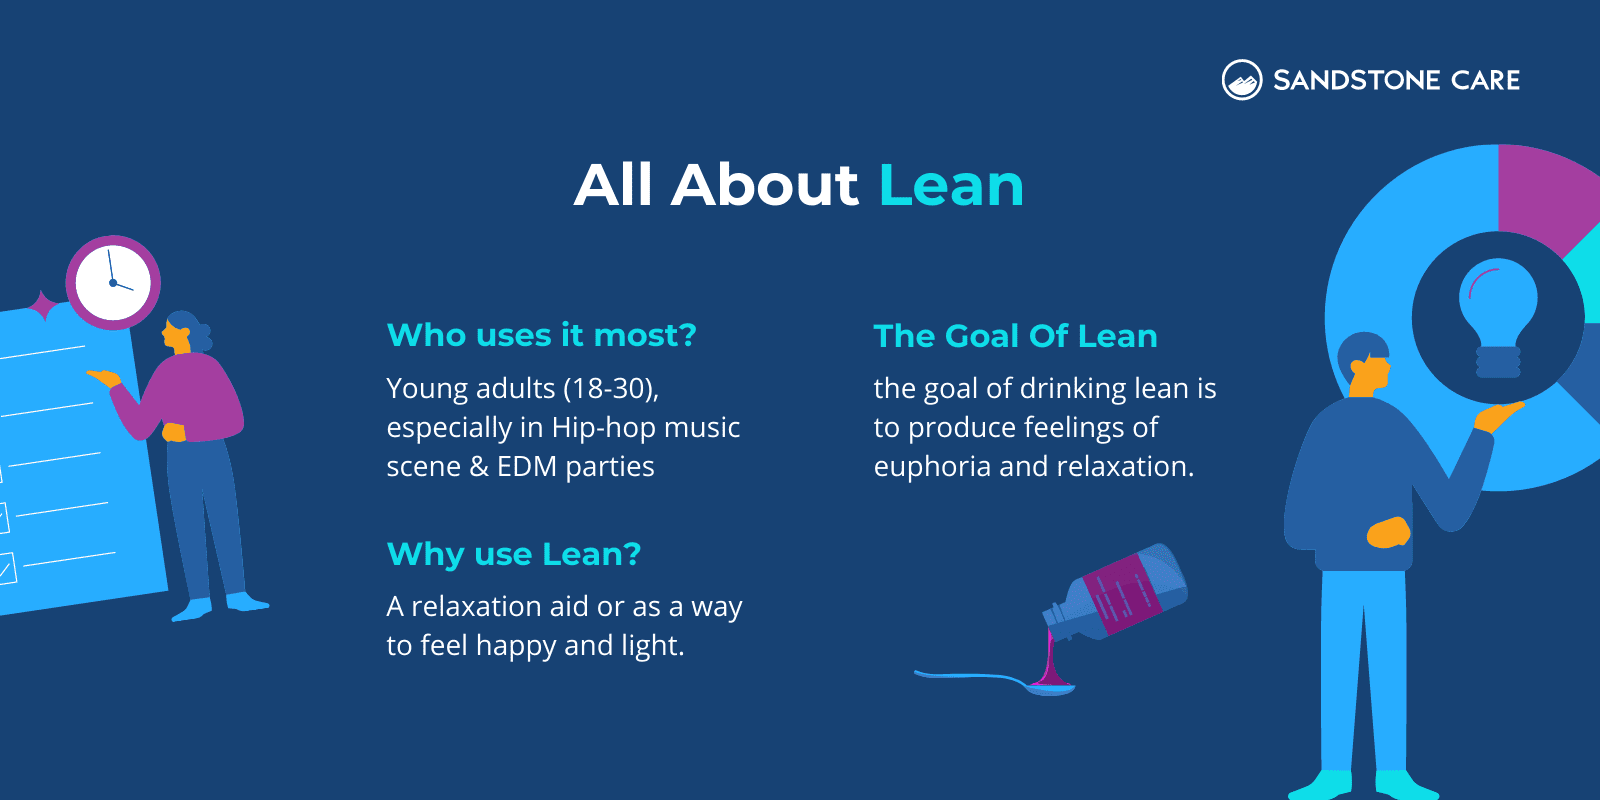 "All About Lean" title written above answers to 1. Who uses it most? 2. Why use Lean? and 3. The Goal of Lean with relevant illustrations and graphics